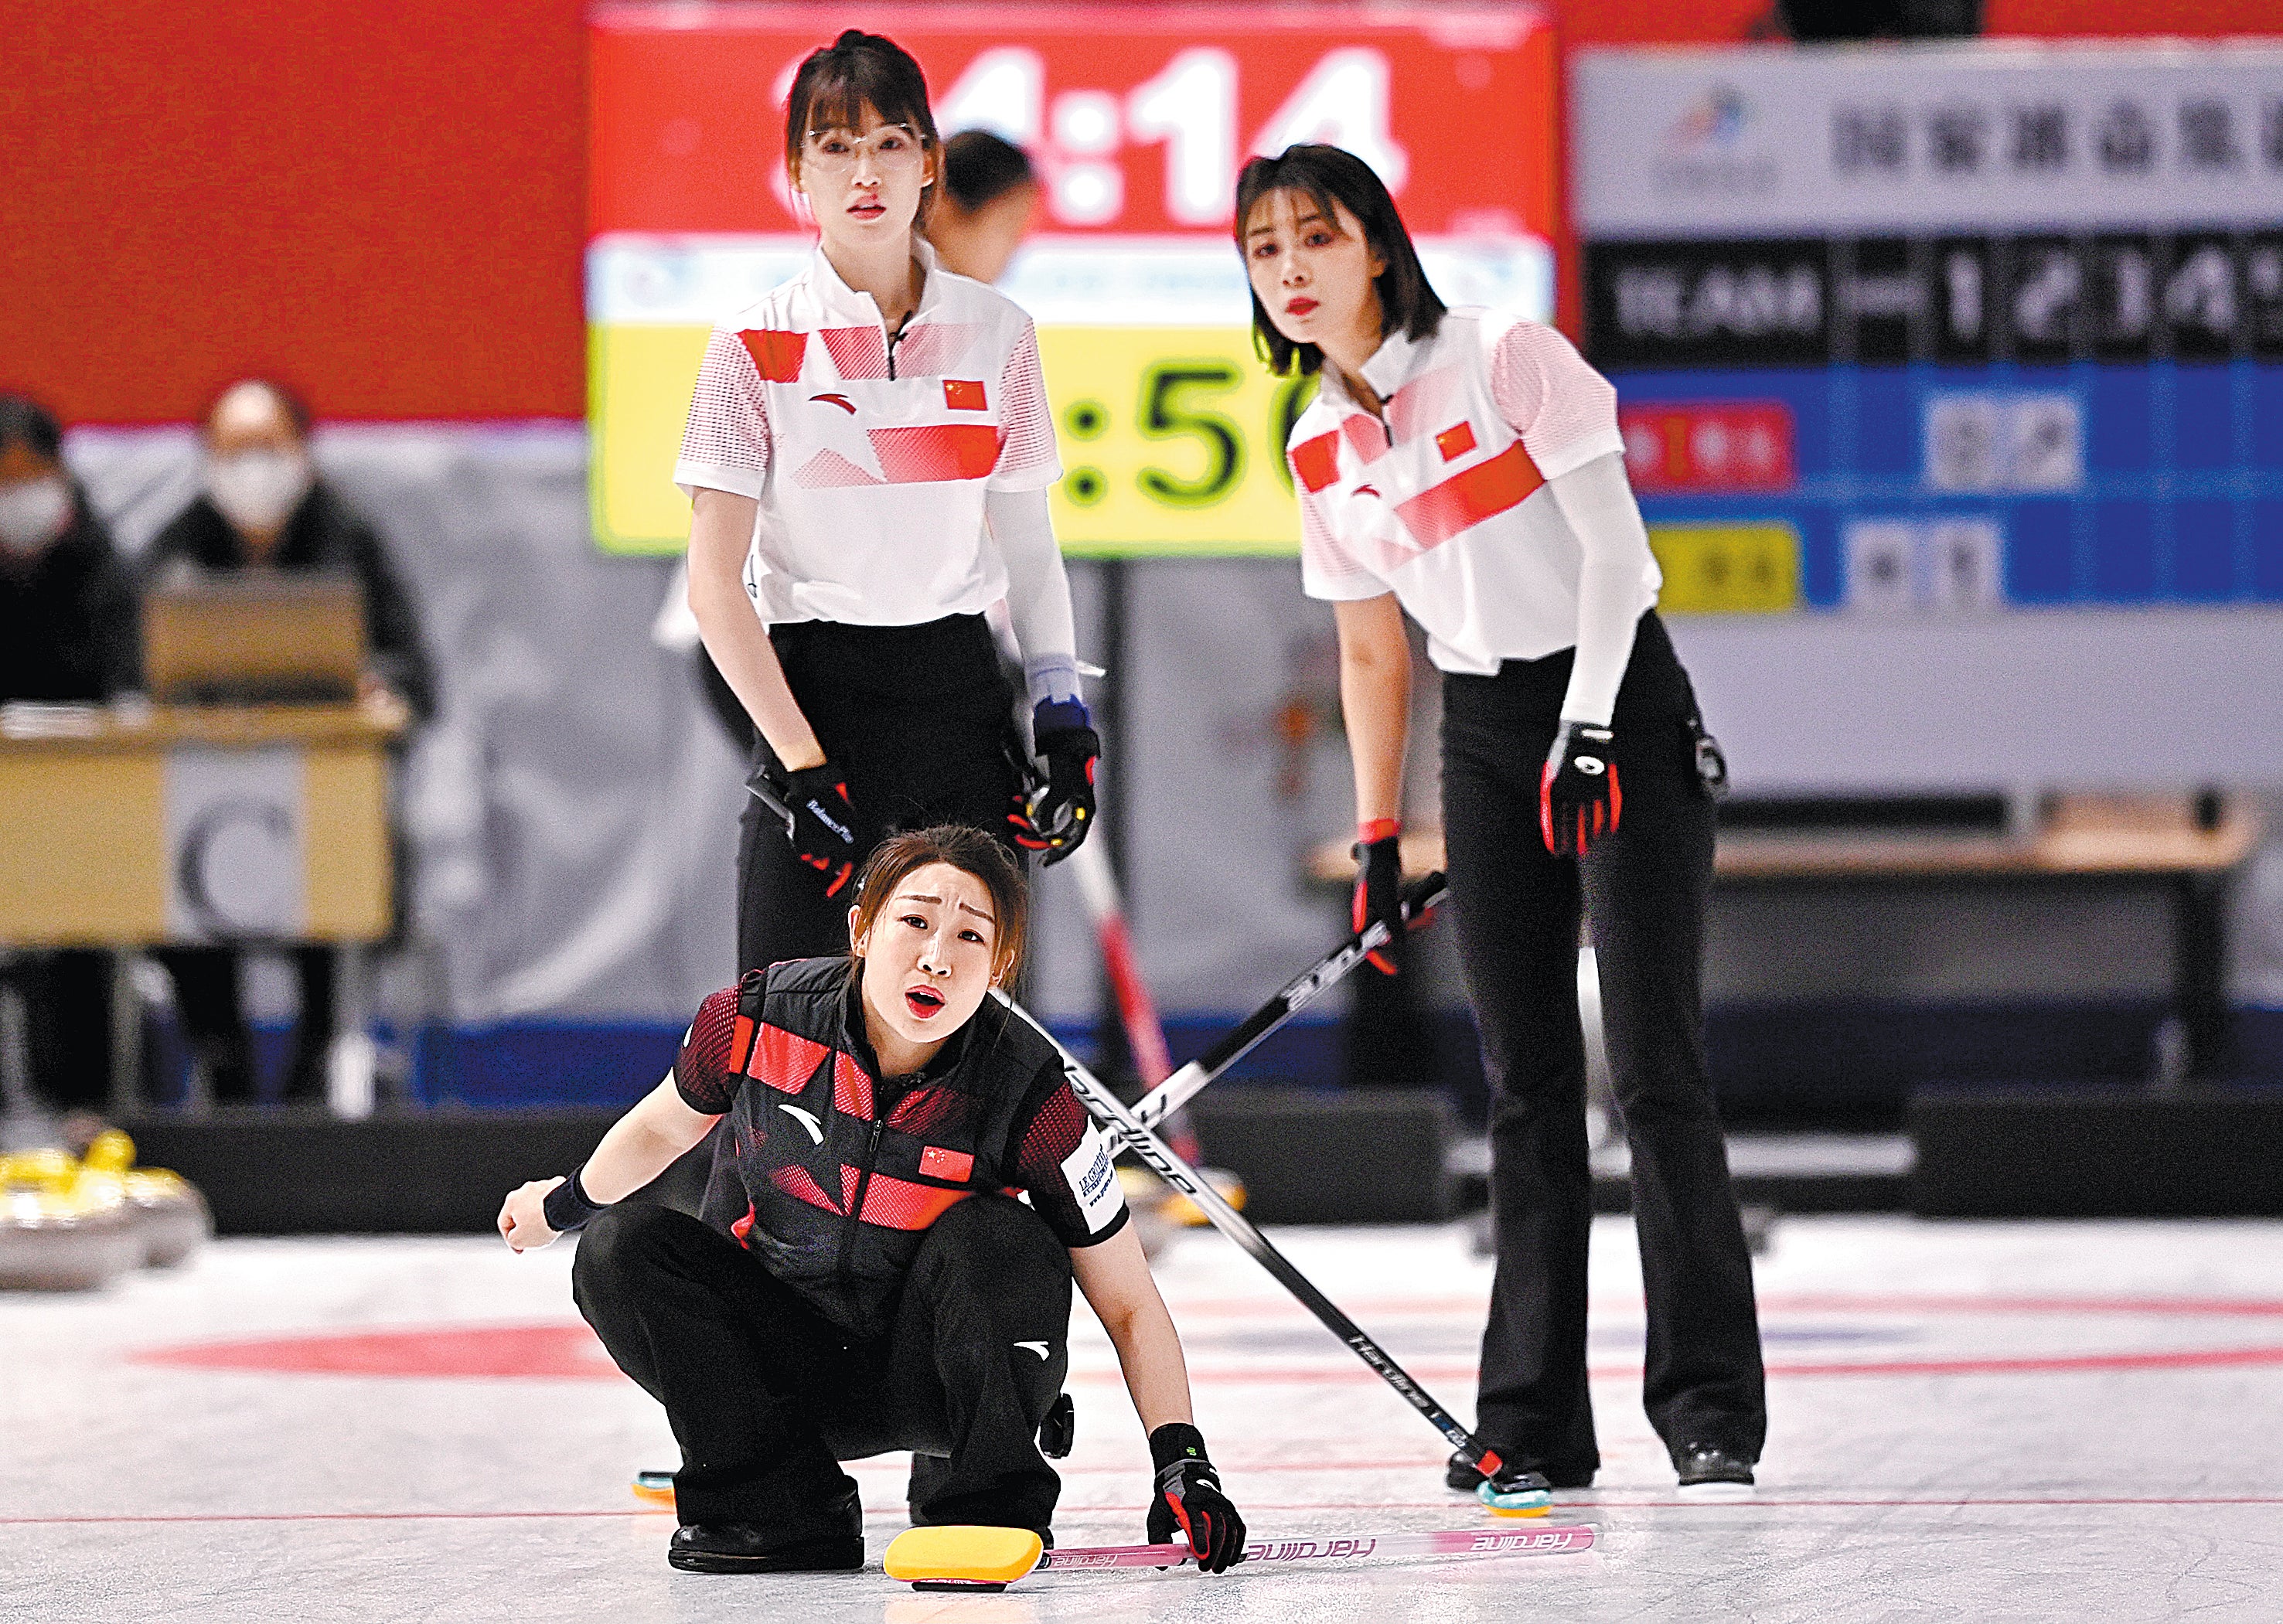 Curlers keep their focus on the ice during Olympic trials for China’s national team at Erqi Locomotive Factory in Beijing